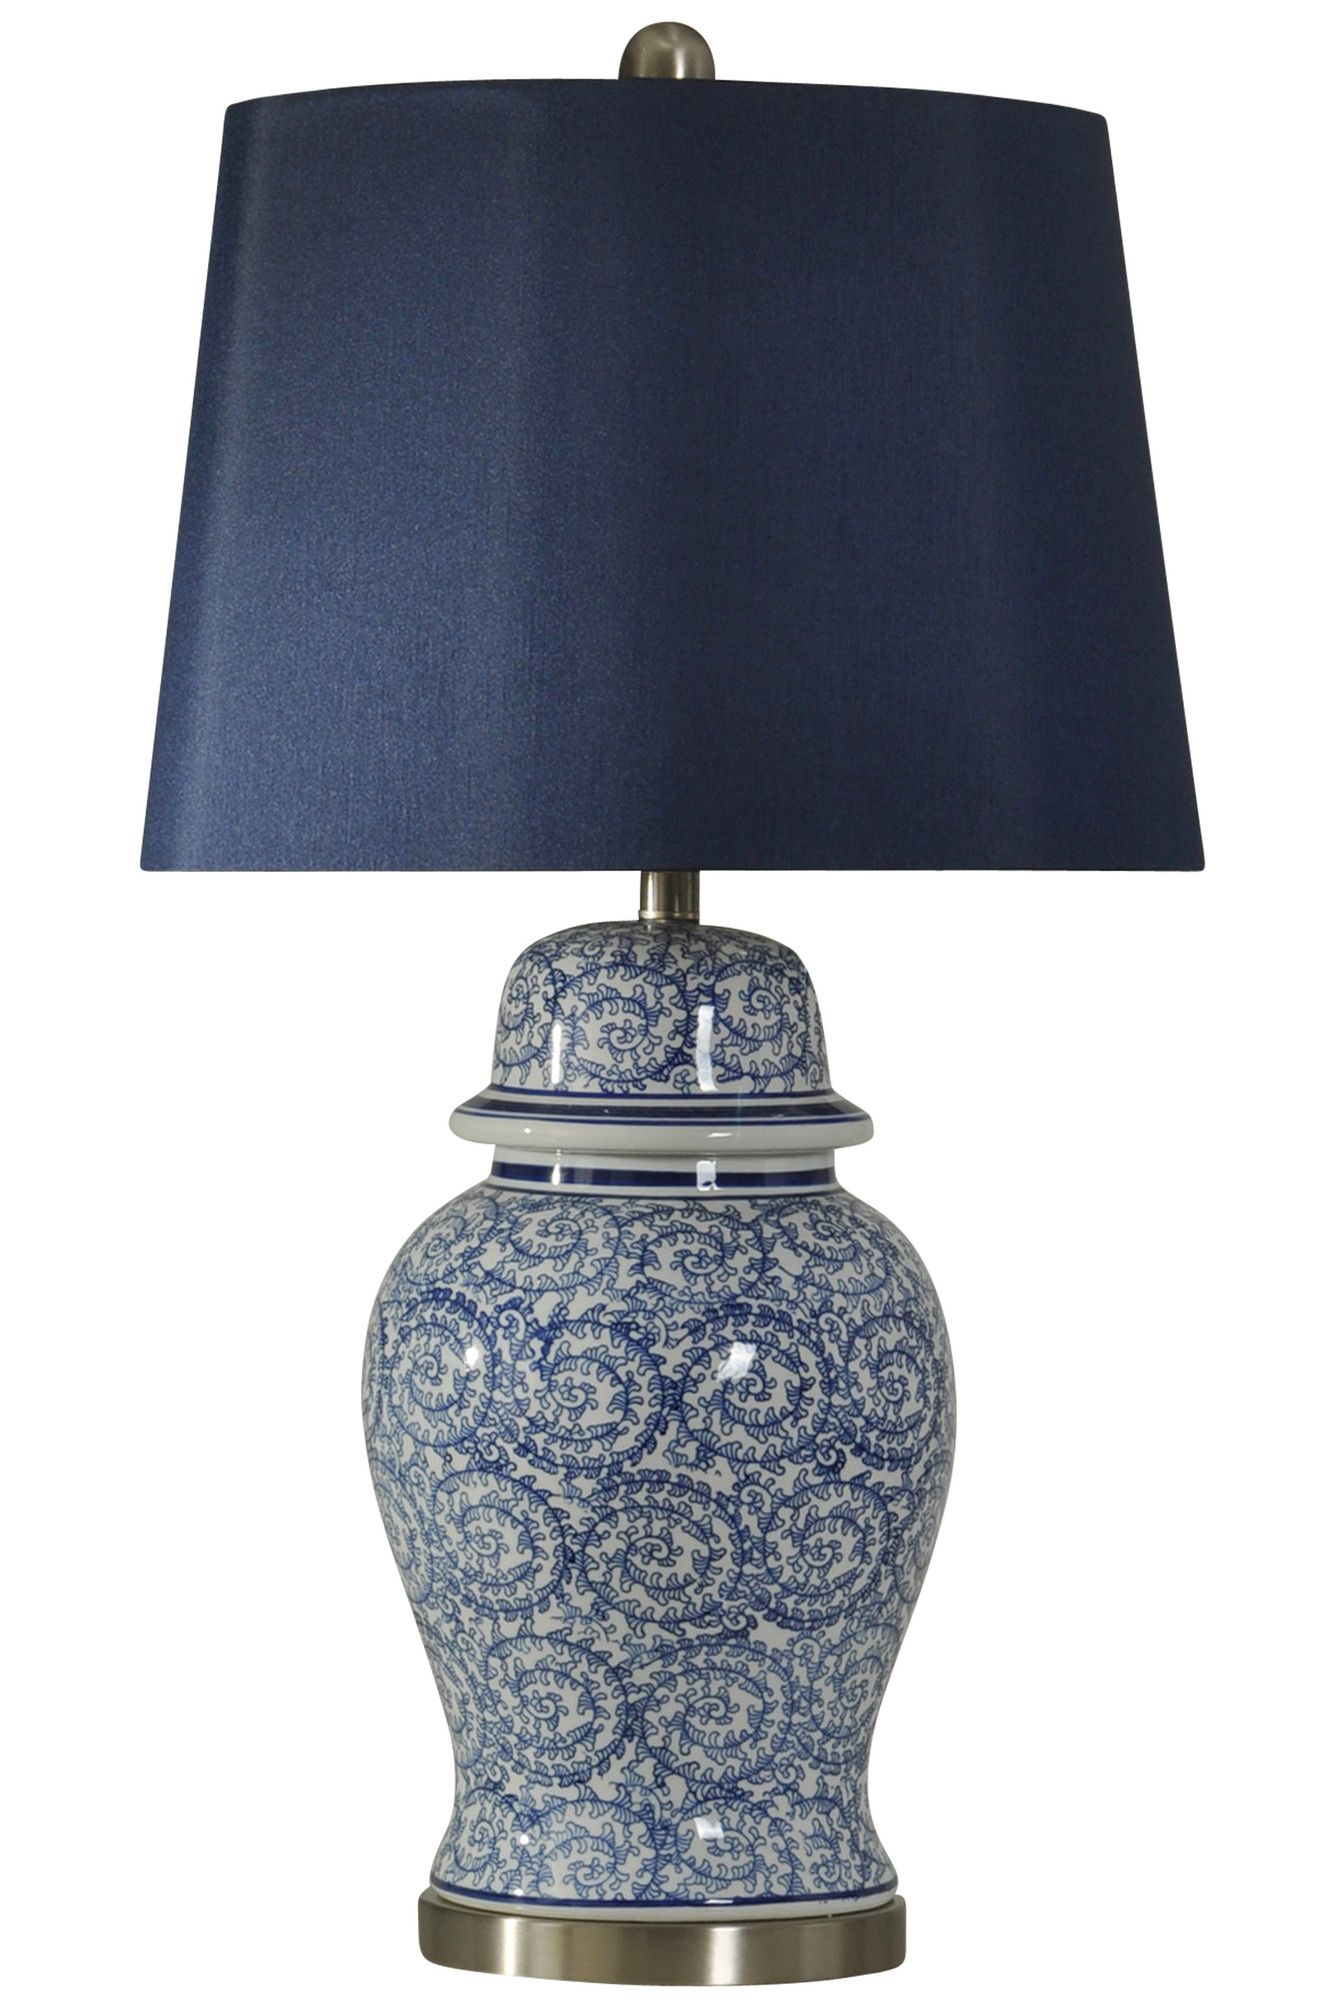 sherwood ginger jar table lamp products blue tall accent lamps small low end tables bronze for living room glass and chairs modern farmhouse coffee battery operated lighting lap